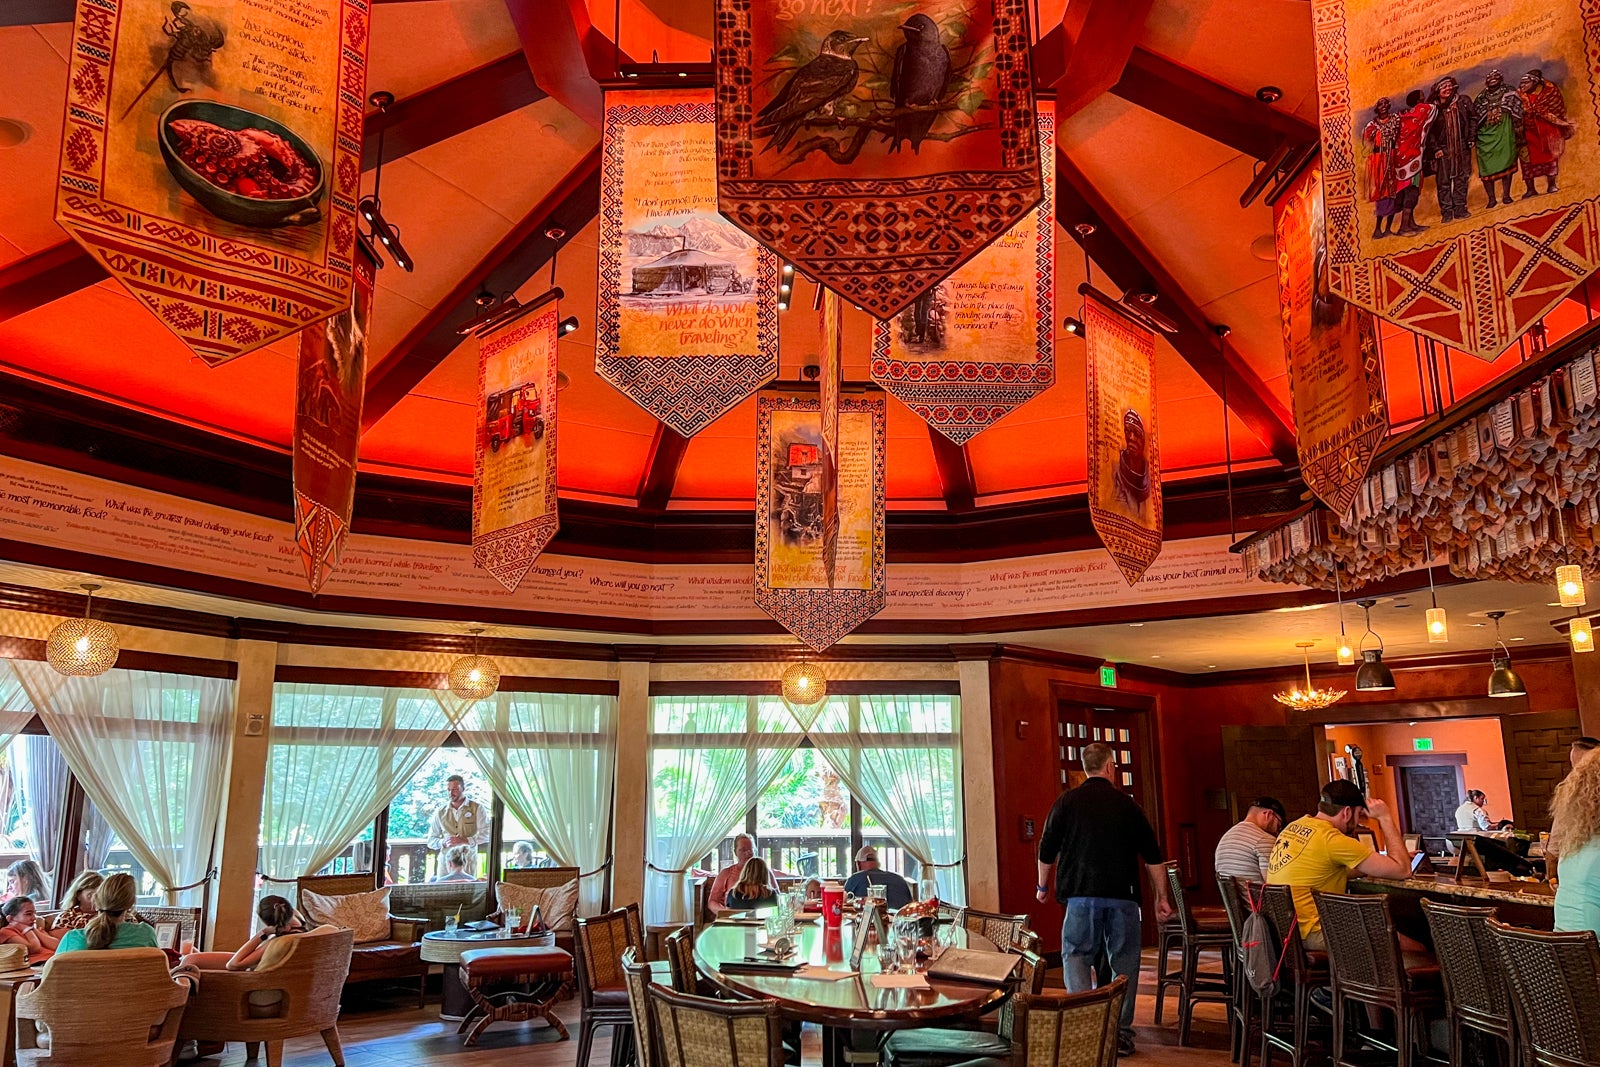 The best restaurants at Disney World in 2022 - The Points Guy